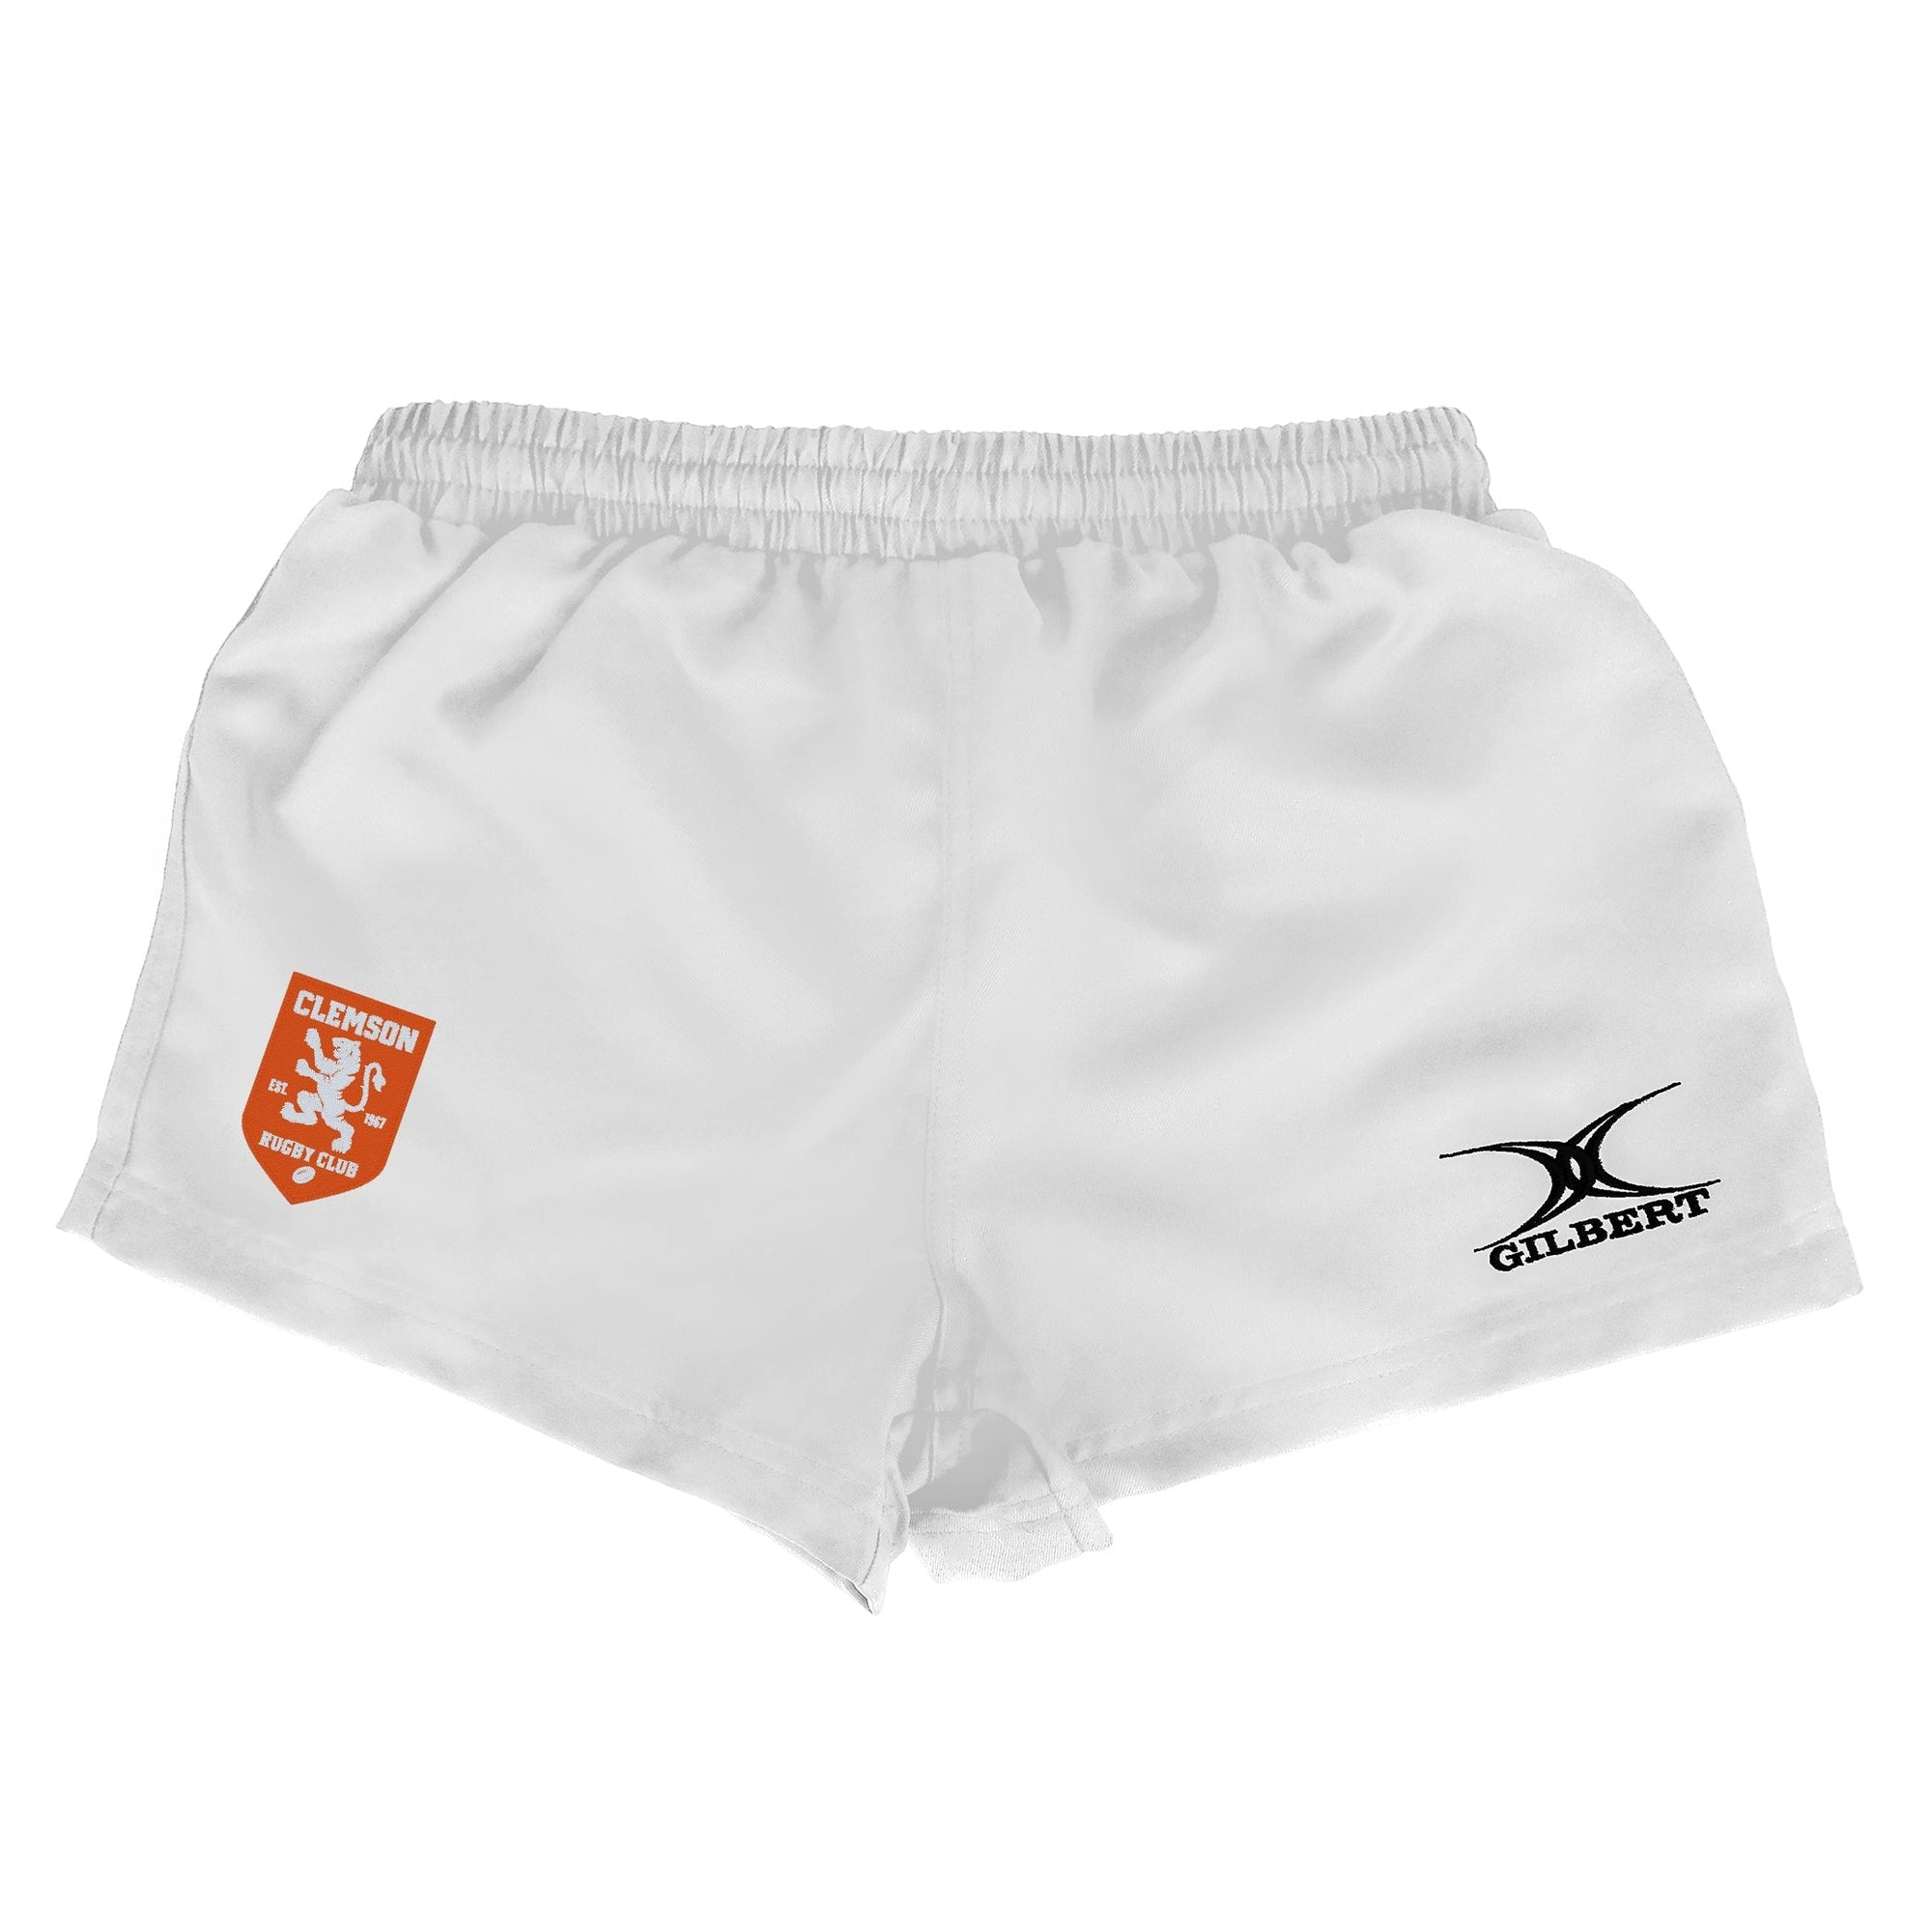 Rugby Imports Clemson Rugby Saracen Rugby Shorts